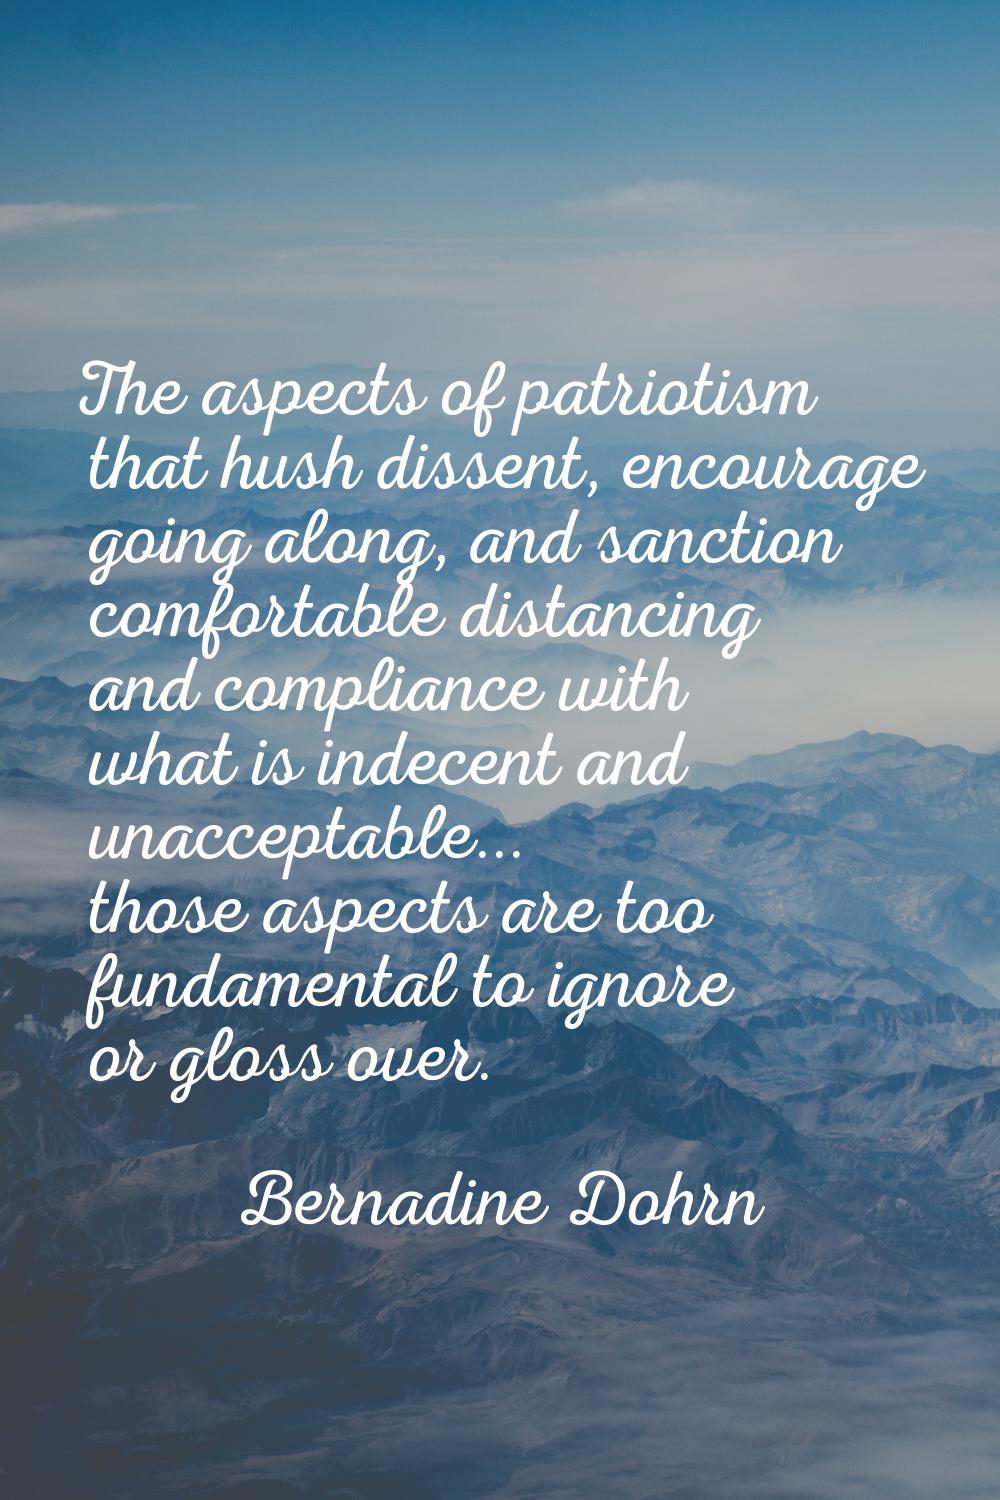 The aspects of patriotism that hush dissent, encourage going along, and sanction comfortable distan